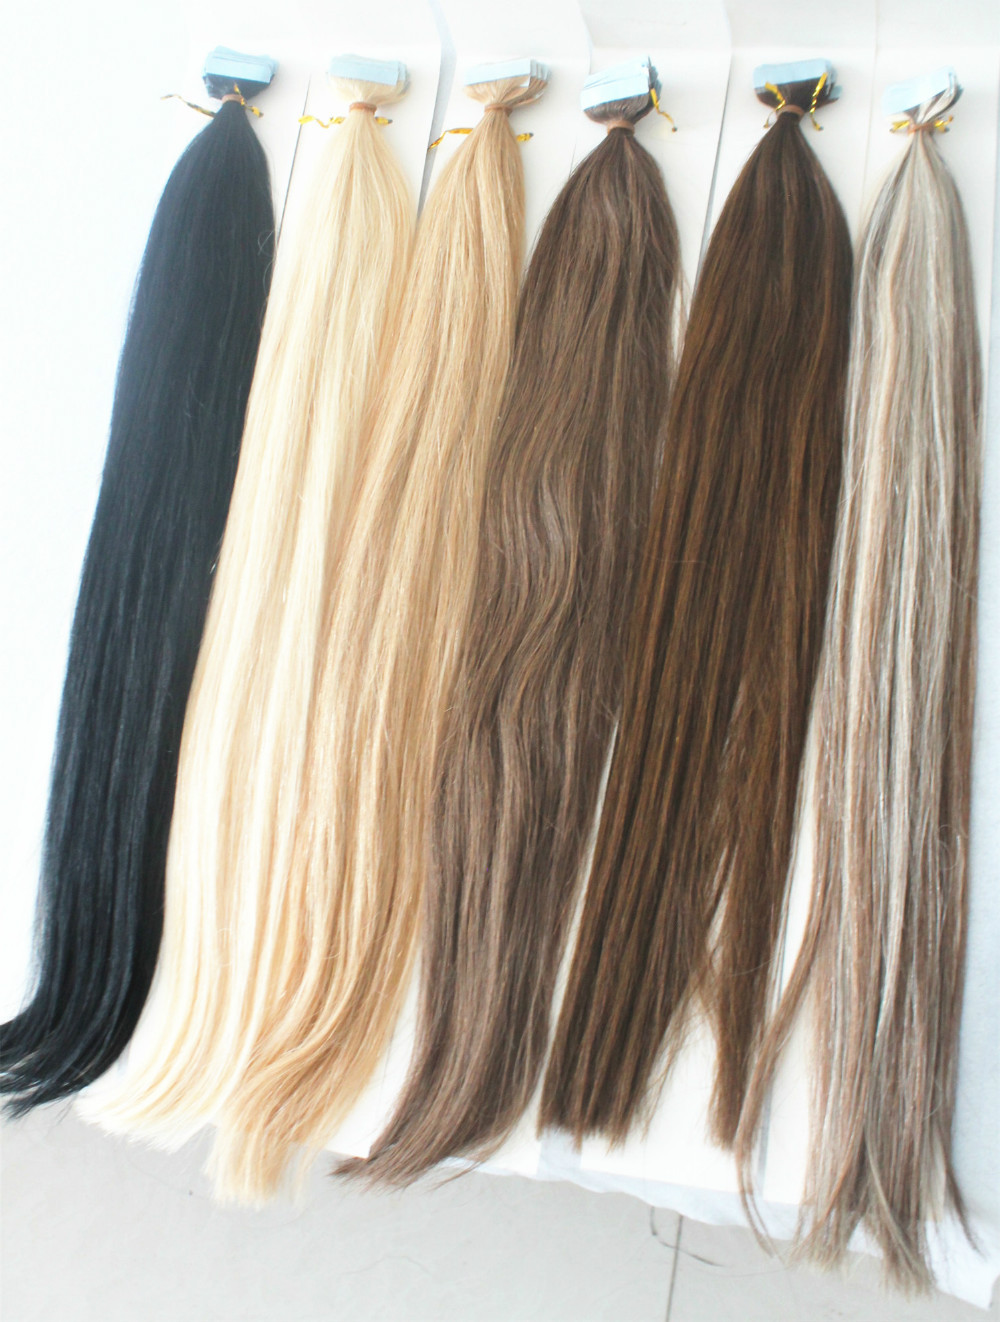 Cheap Tape Hair Extensions,Natural Human Hair on tape 40pcs 100g Silky Straight Brazilian Virgin Hair Remy Skin Weft,4 Colors